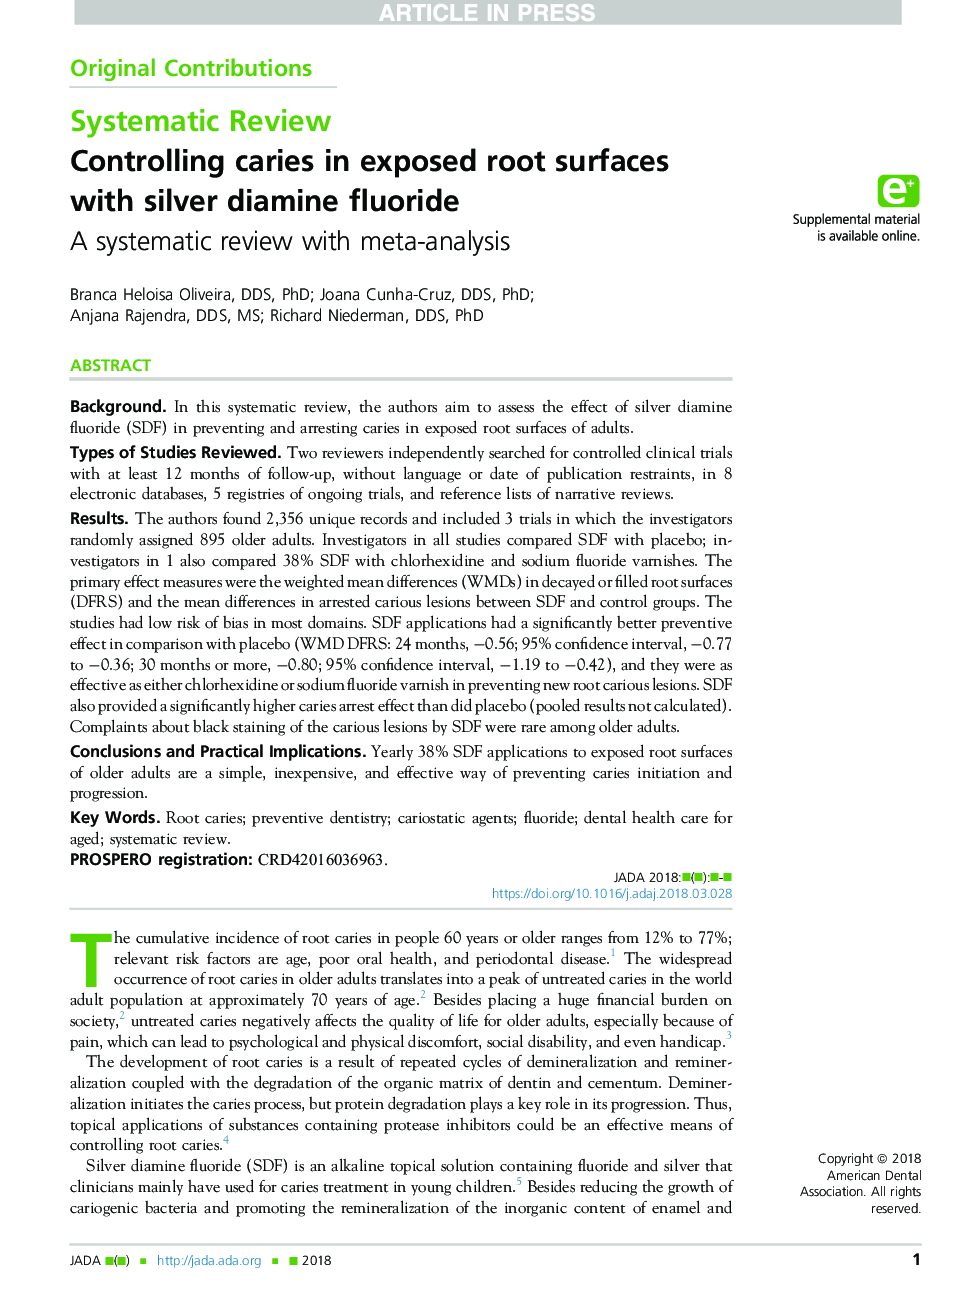 Controlling caries in exposed root surfaces with silver diamine fluoride